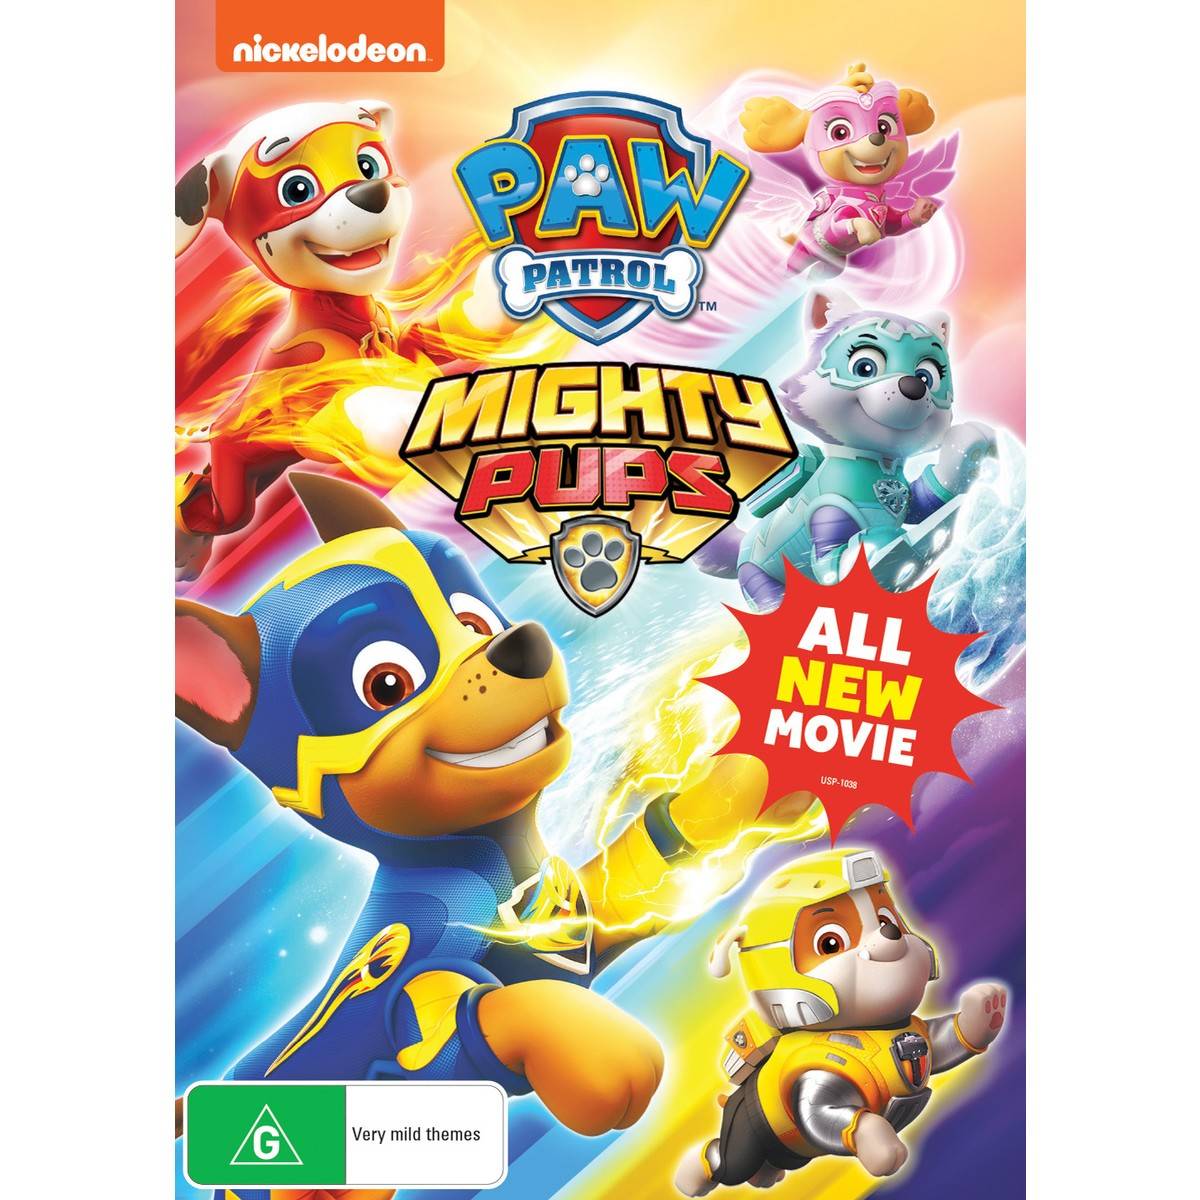 Paw Patrol Mighty Pups All New Movie